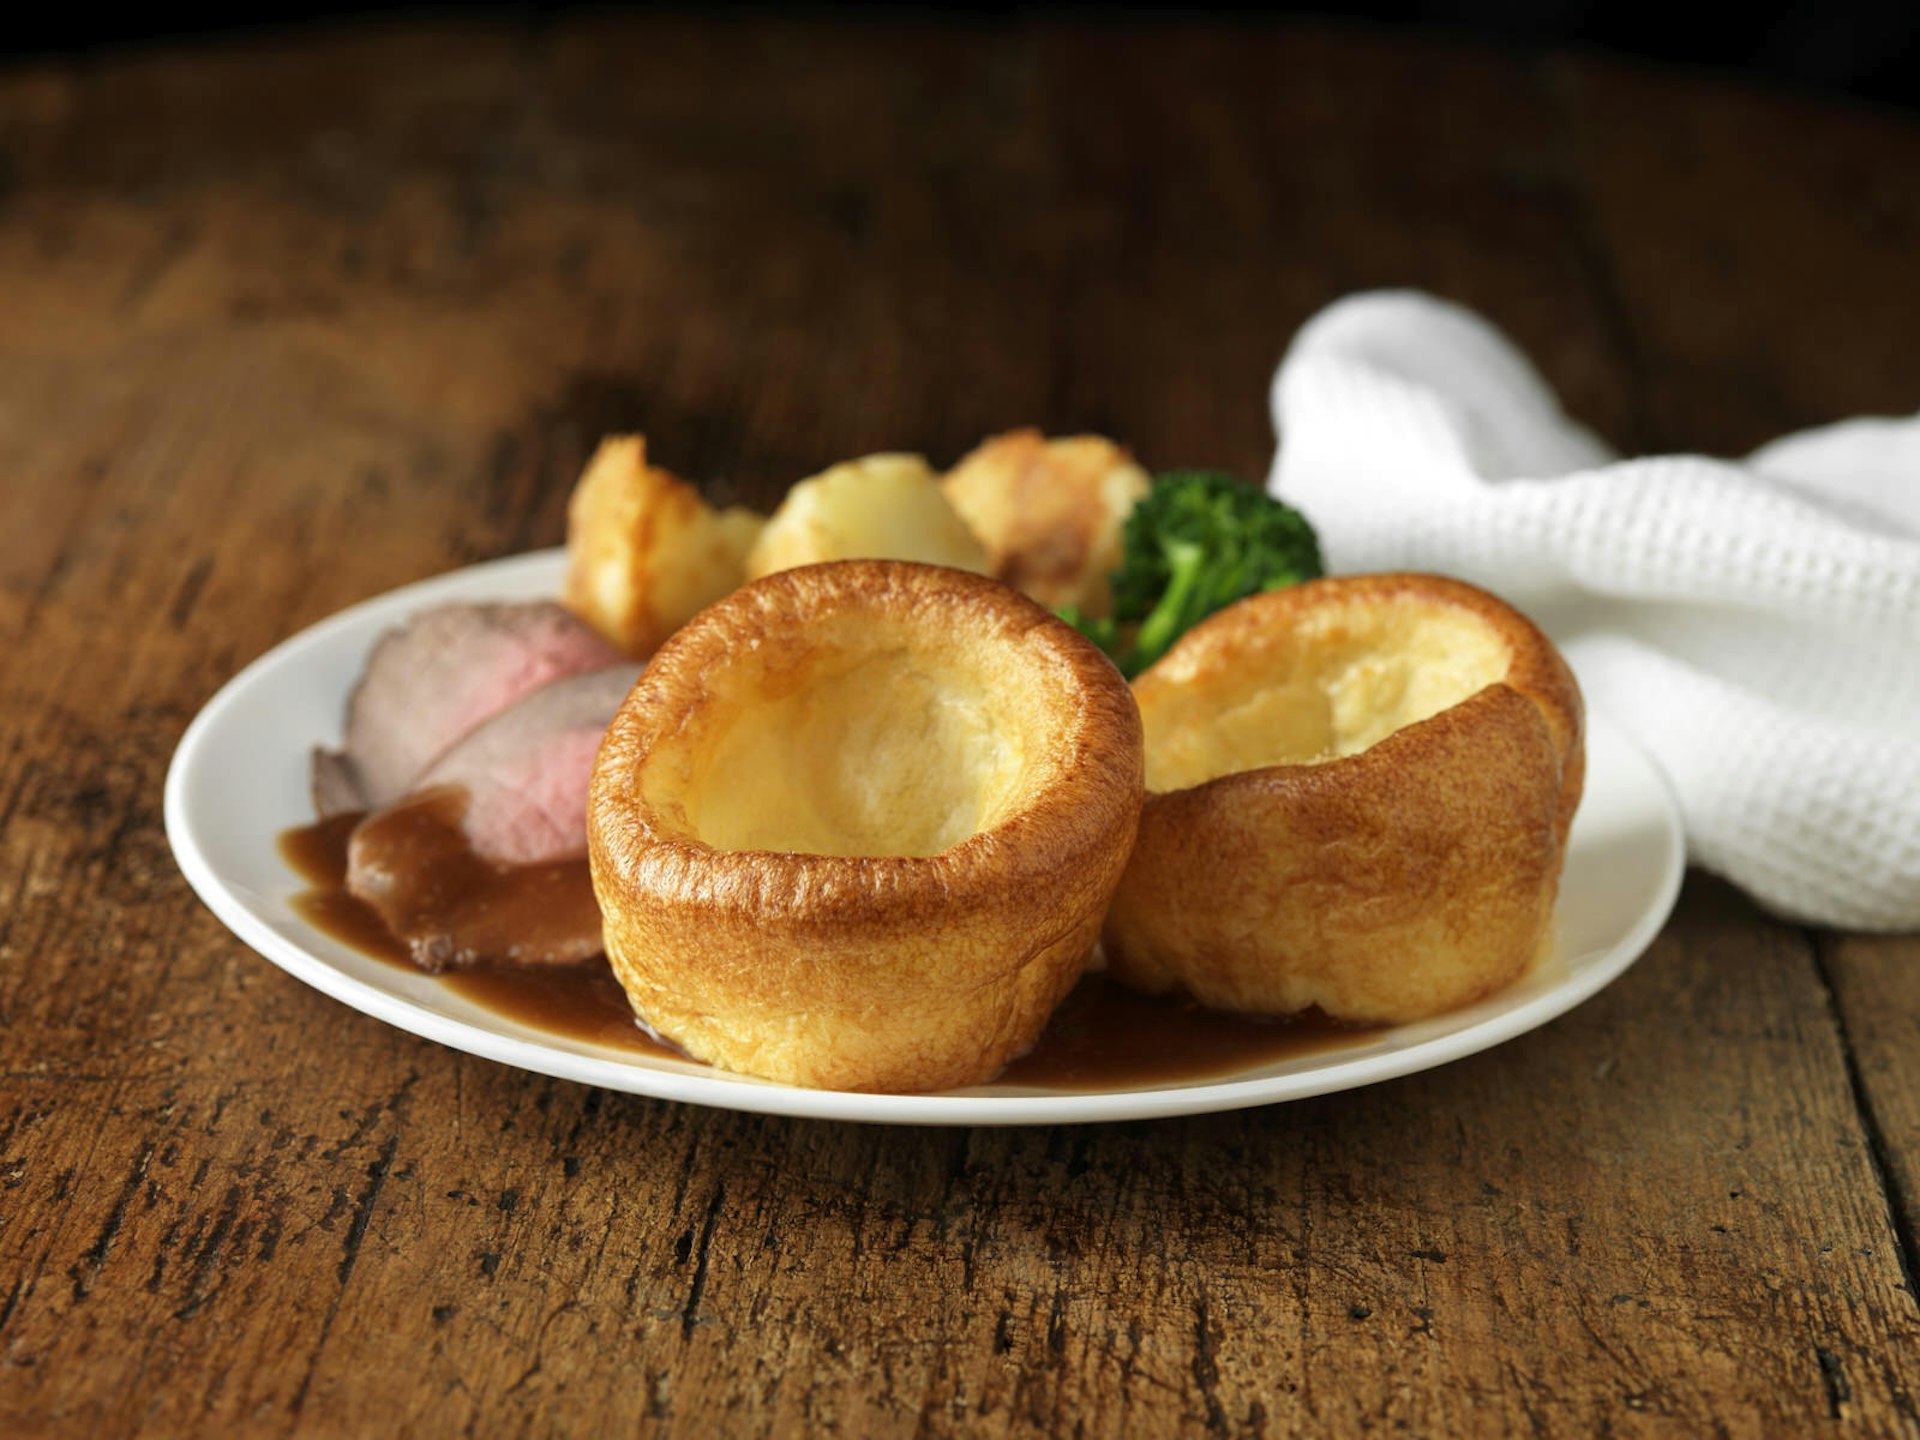 Yorkshire puddings are the county's most famous culinary dish